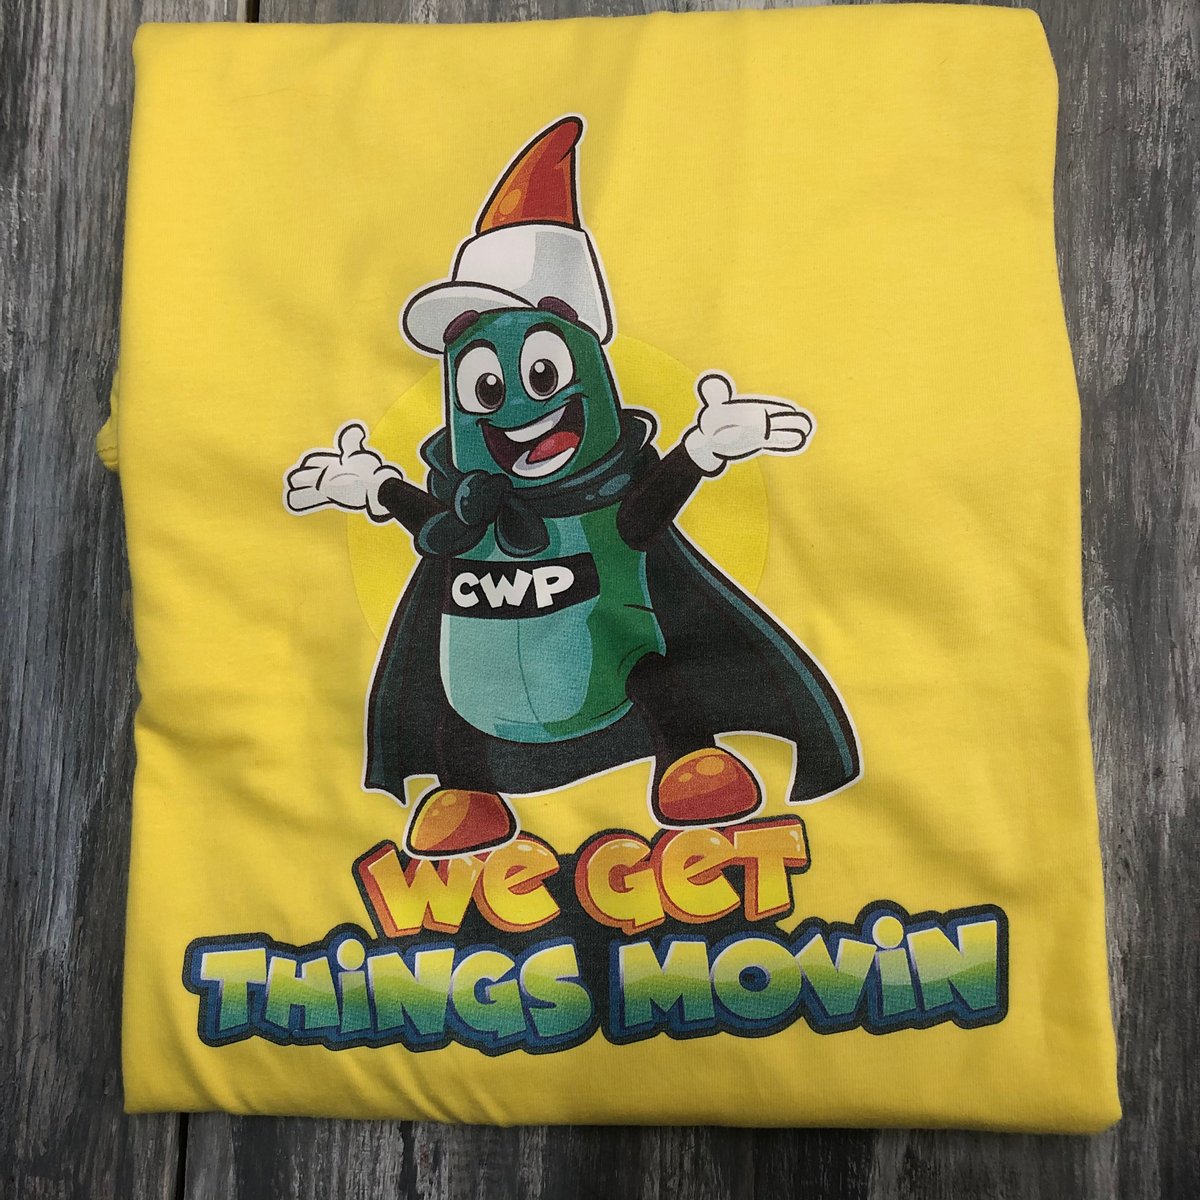 "We Get Things Movin" Reseller Shirt